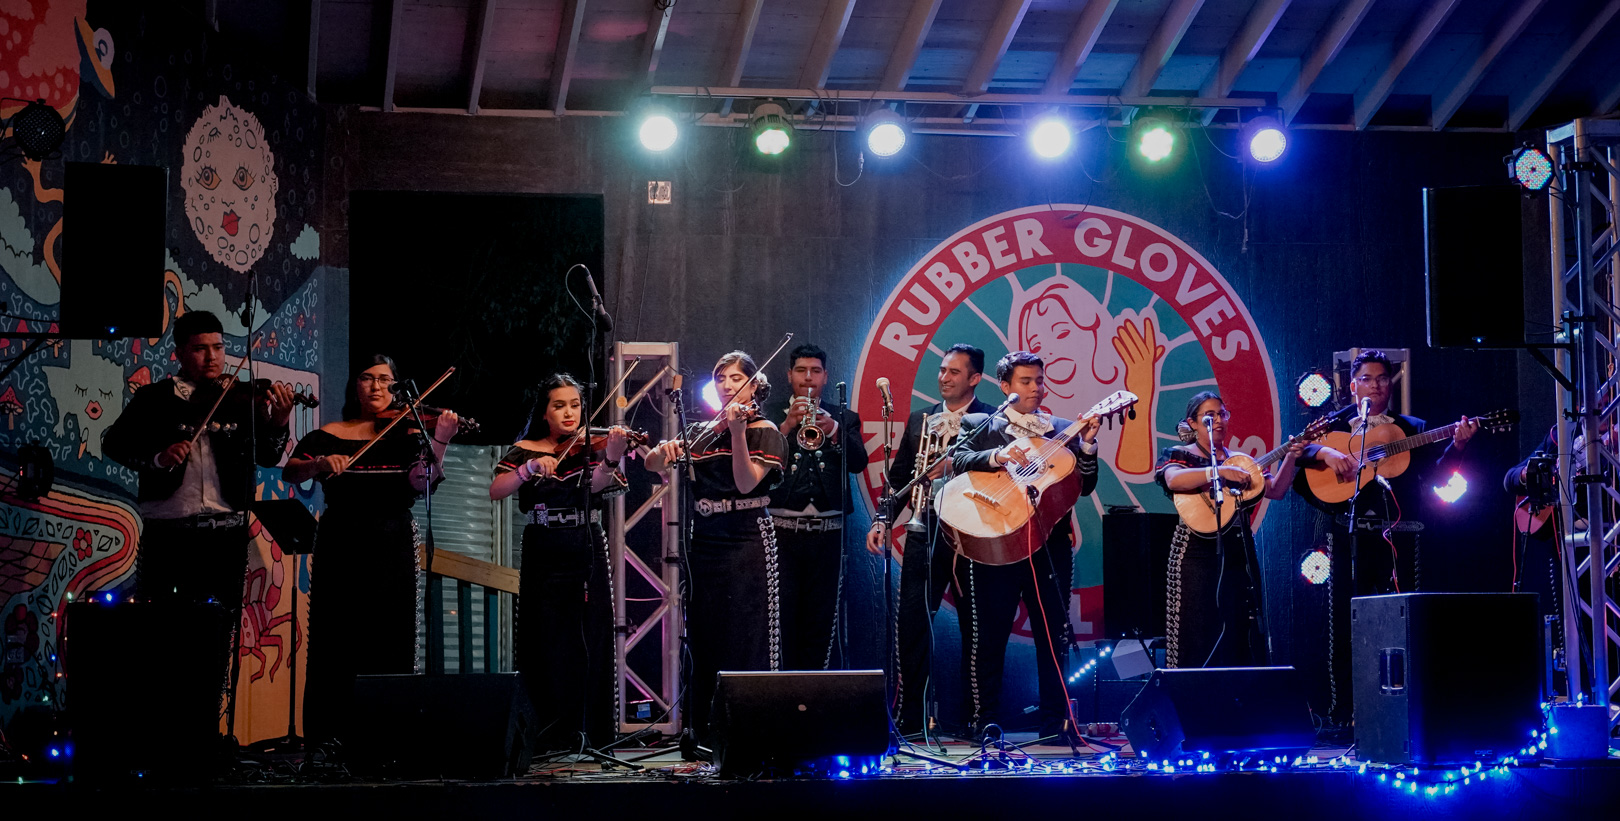 A mariachi band on stage